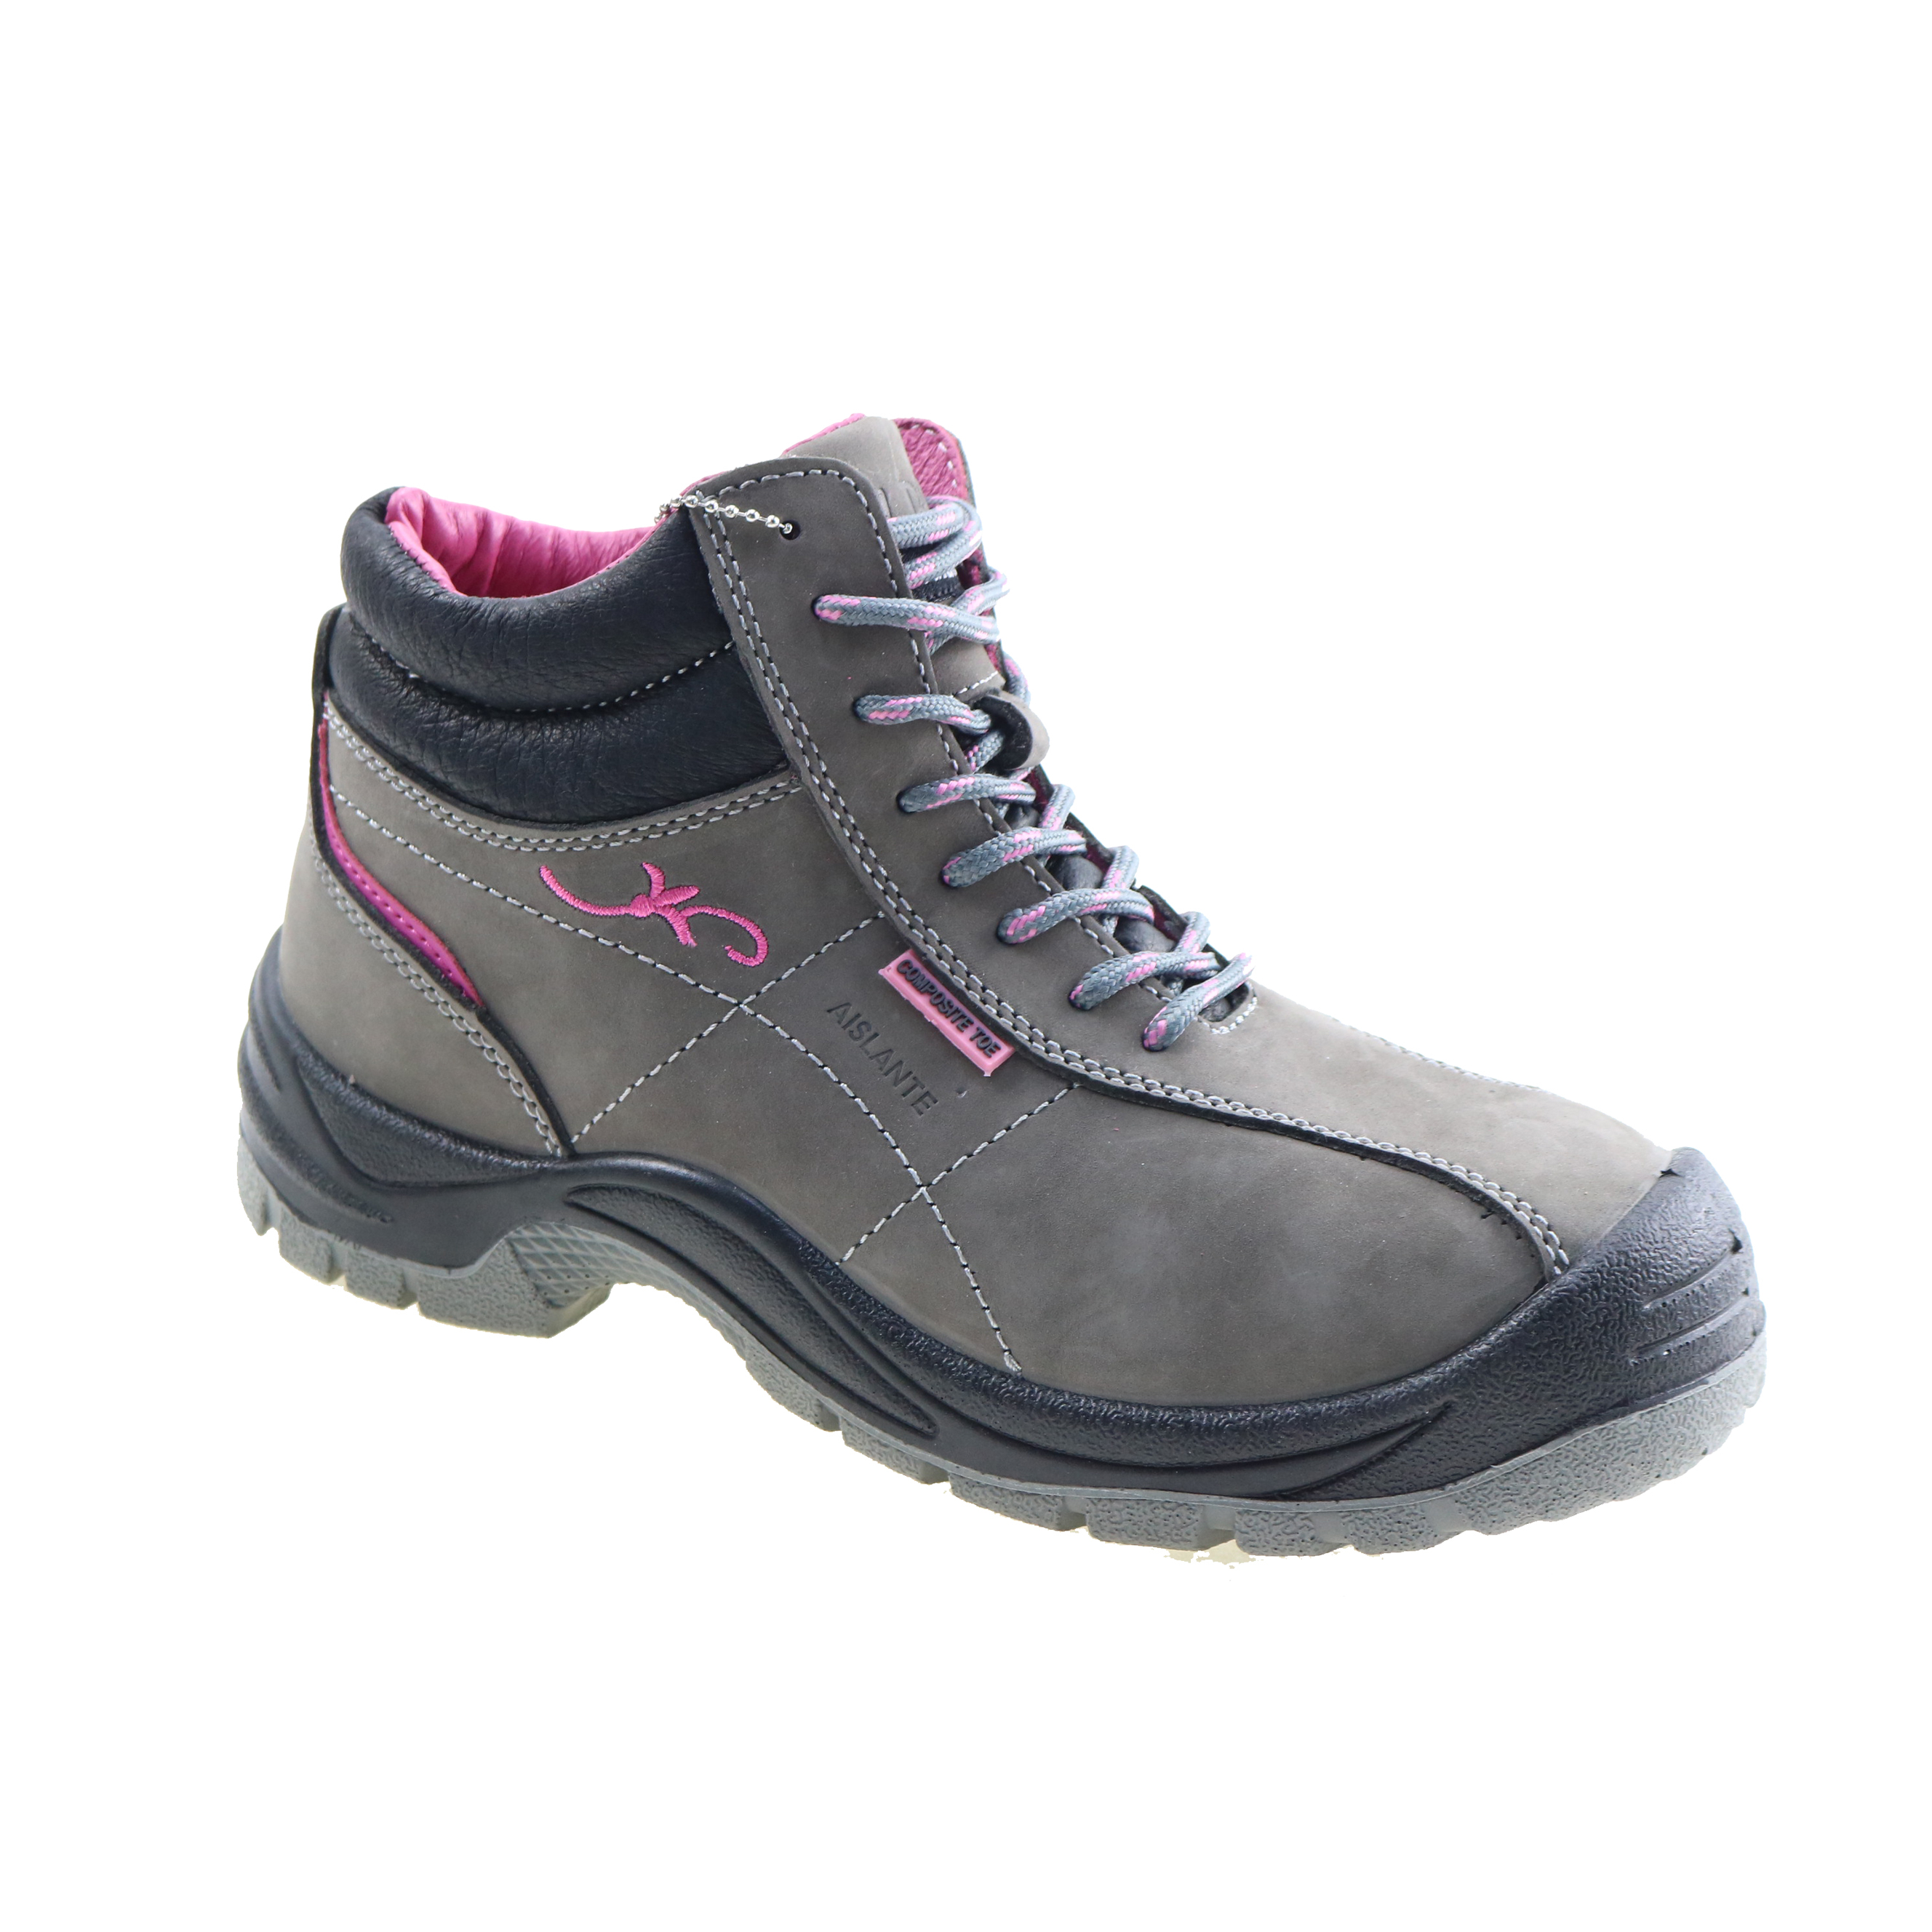 Light Weight Safety Shoes With Steel Toe Dual Density PU Injection Best Selling Safety Shoes Featured Image